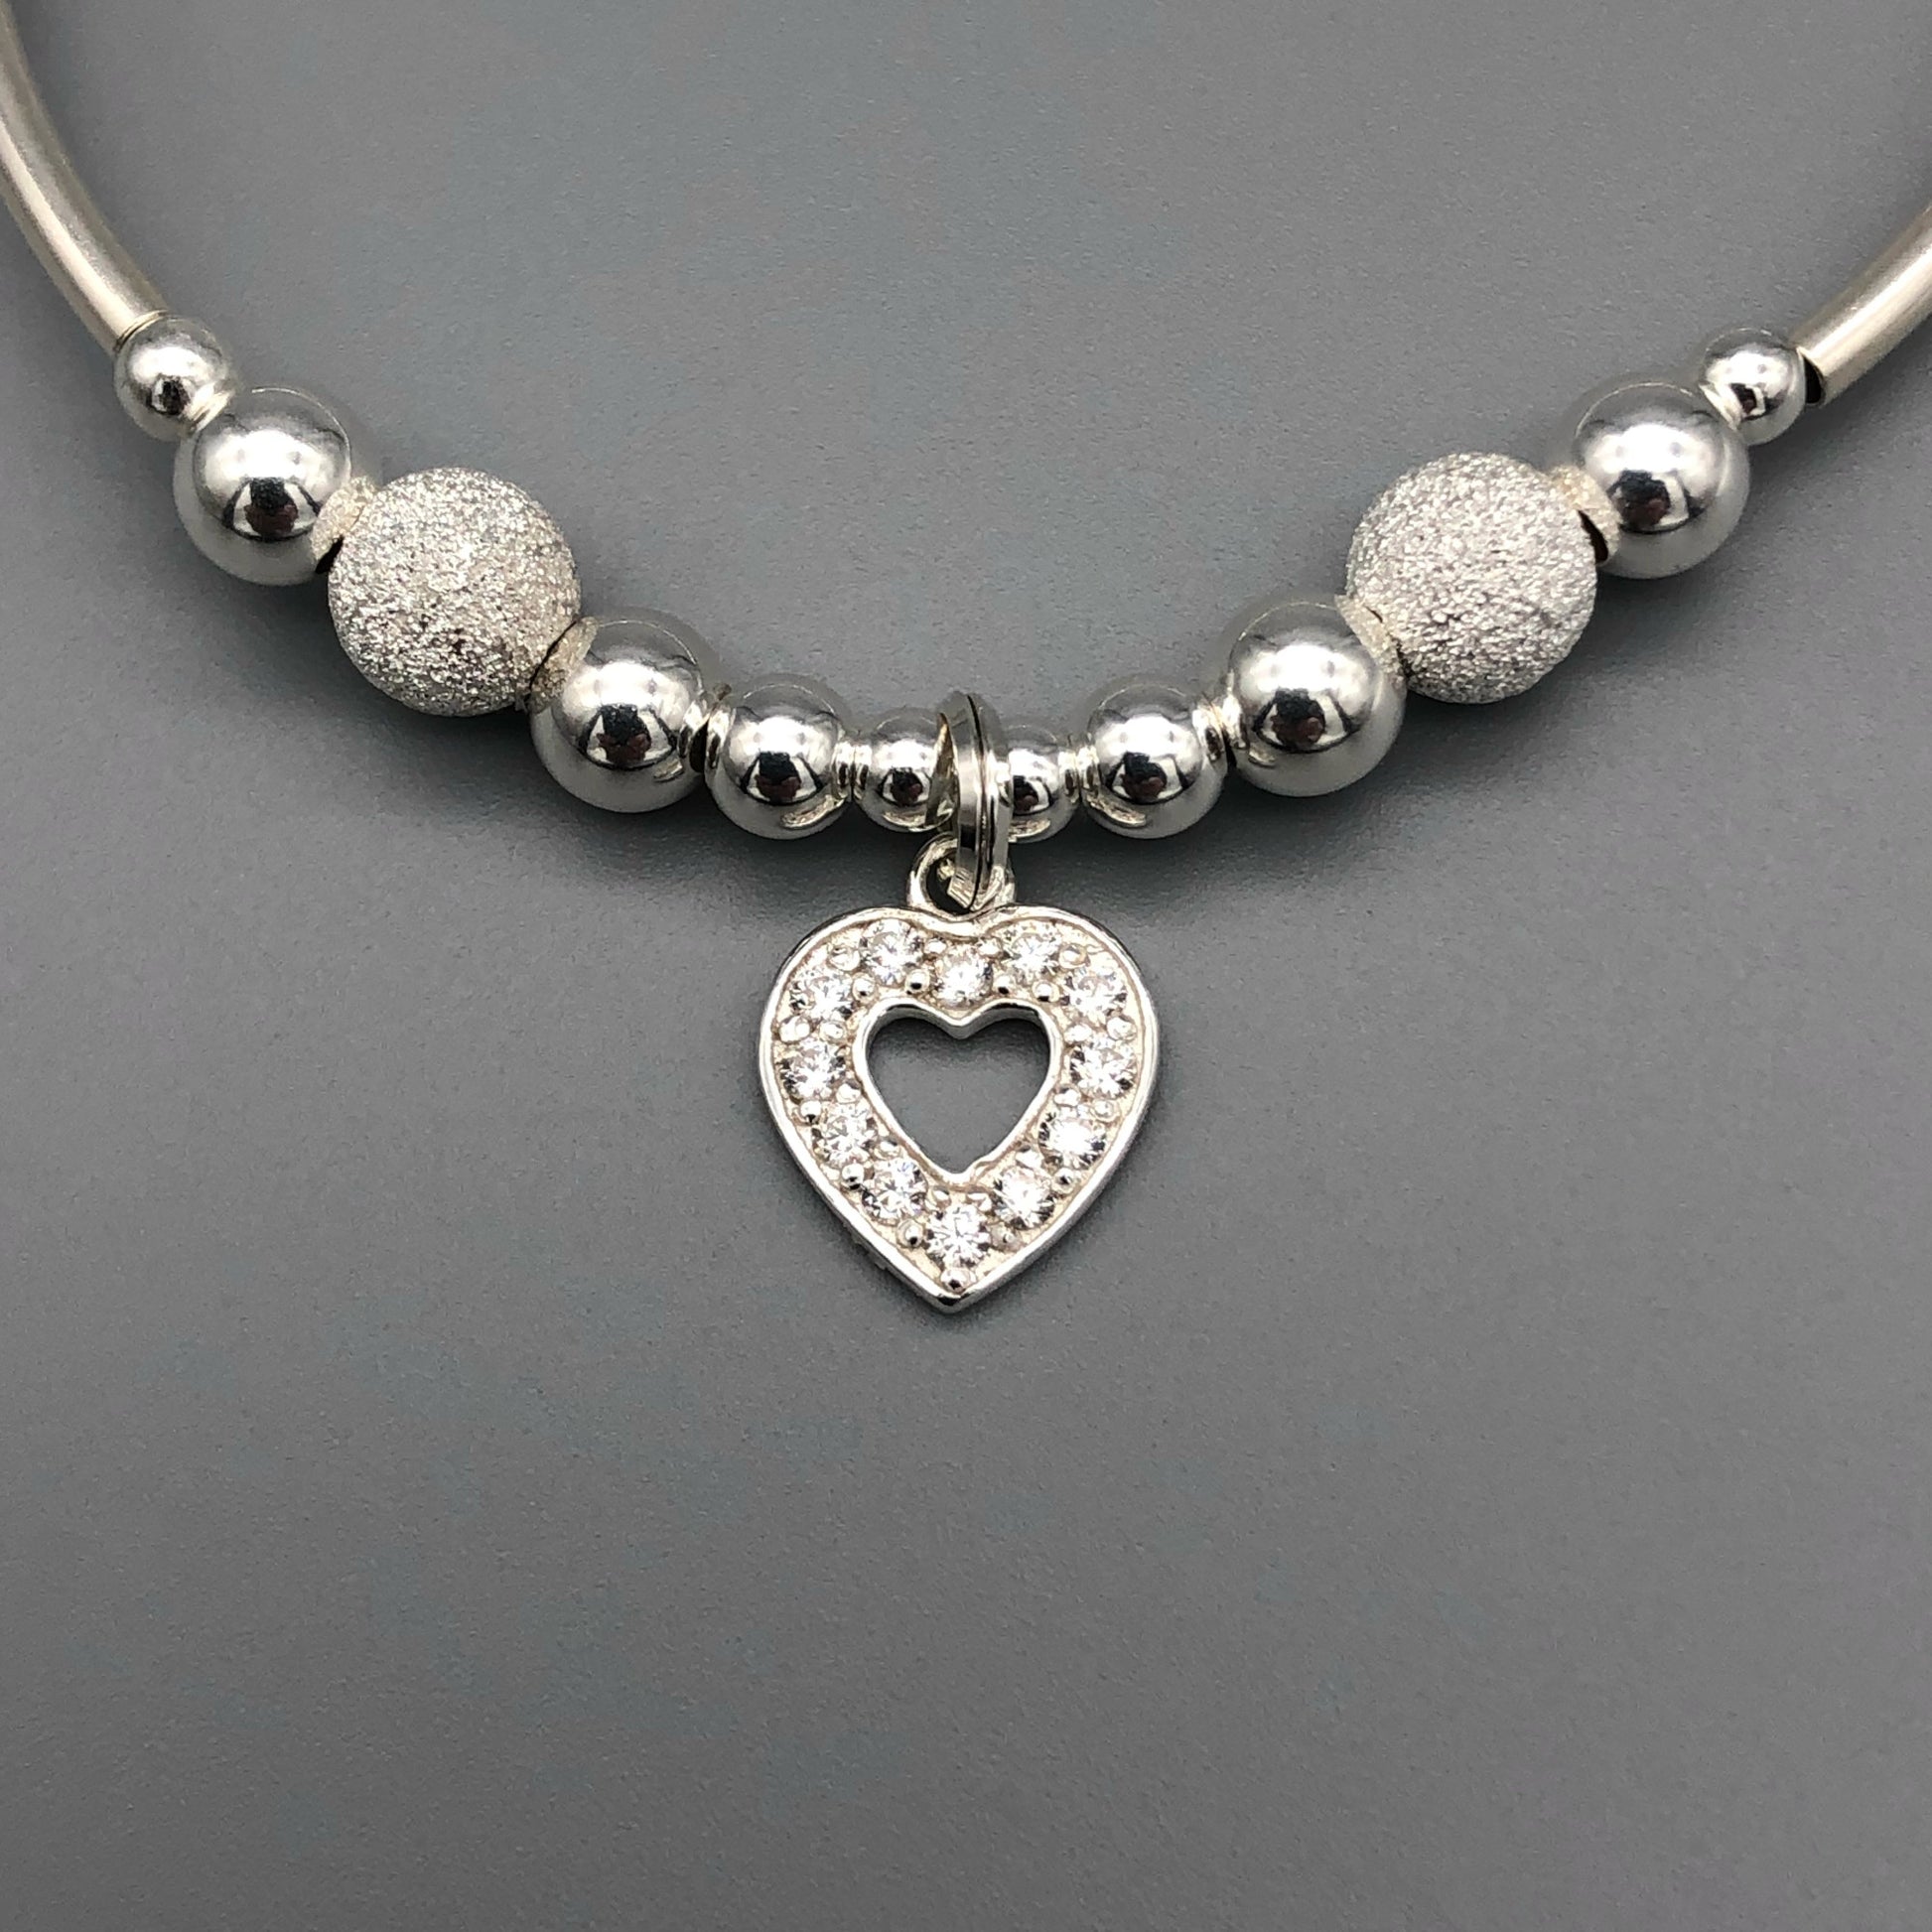 Closeup of Diamond heart charm starburst beads sterling silver hand-made women's stacking bracelet by My Silver Wish